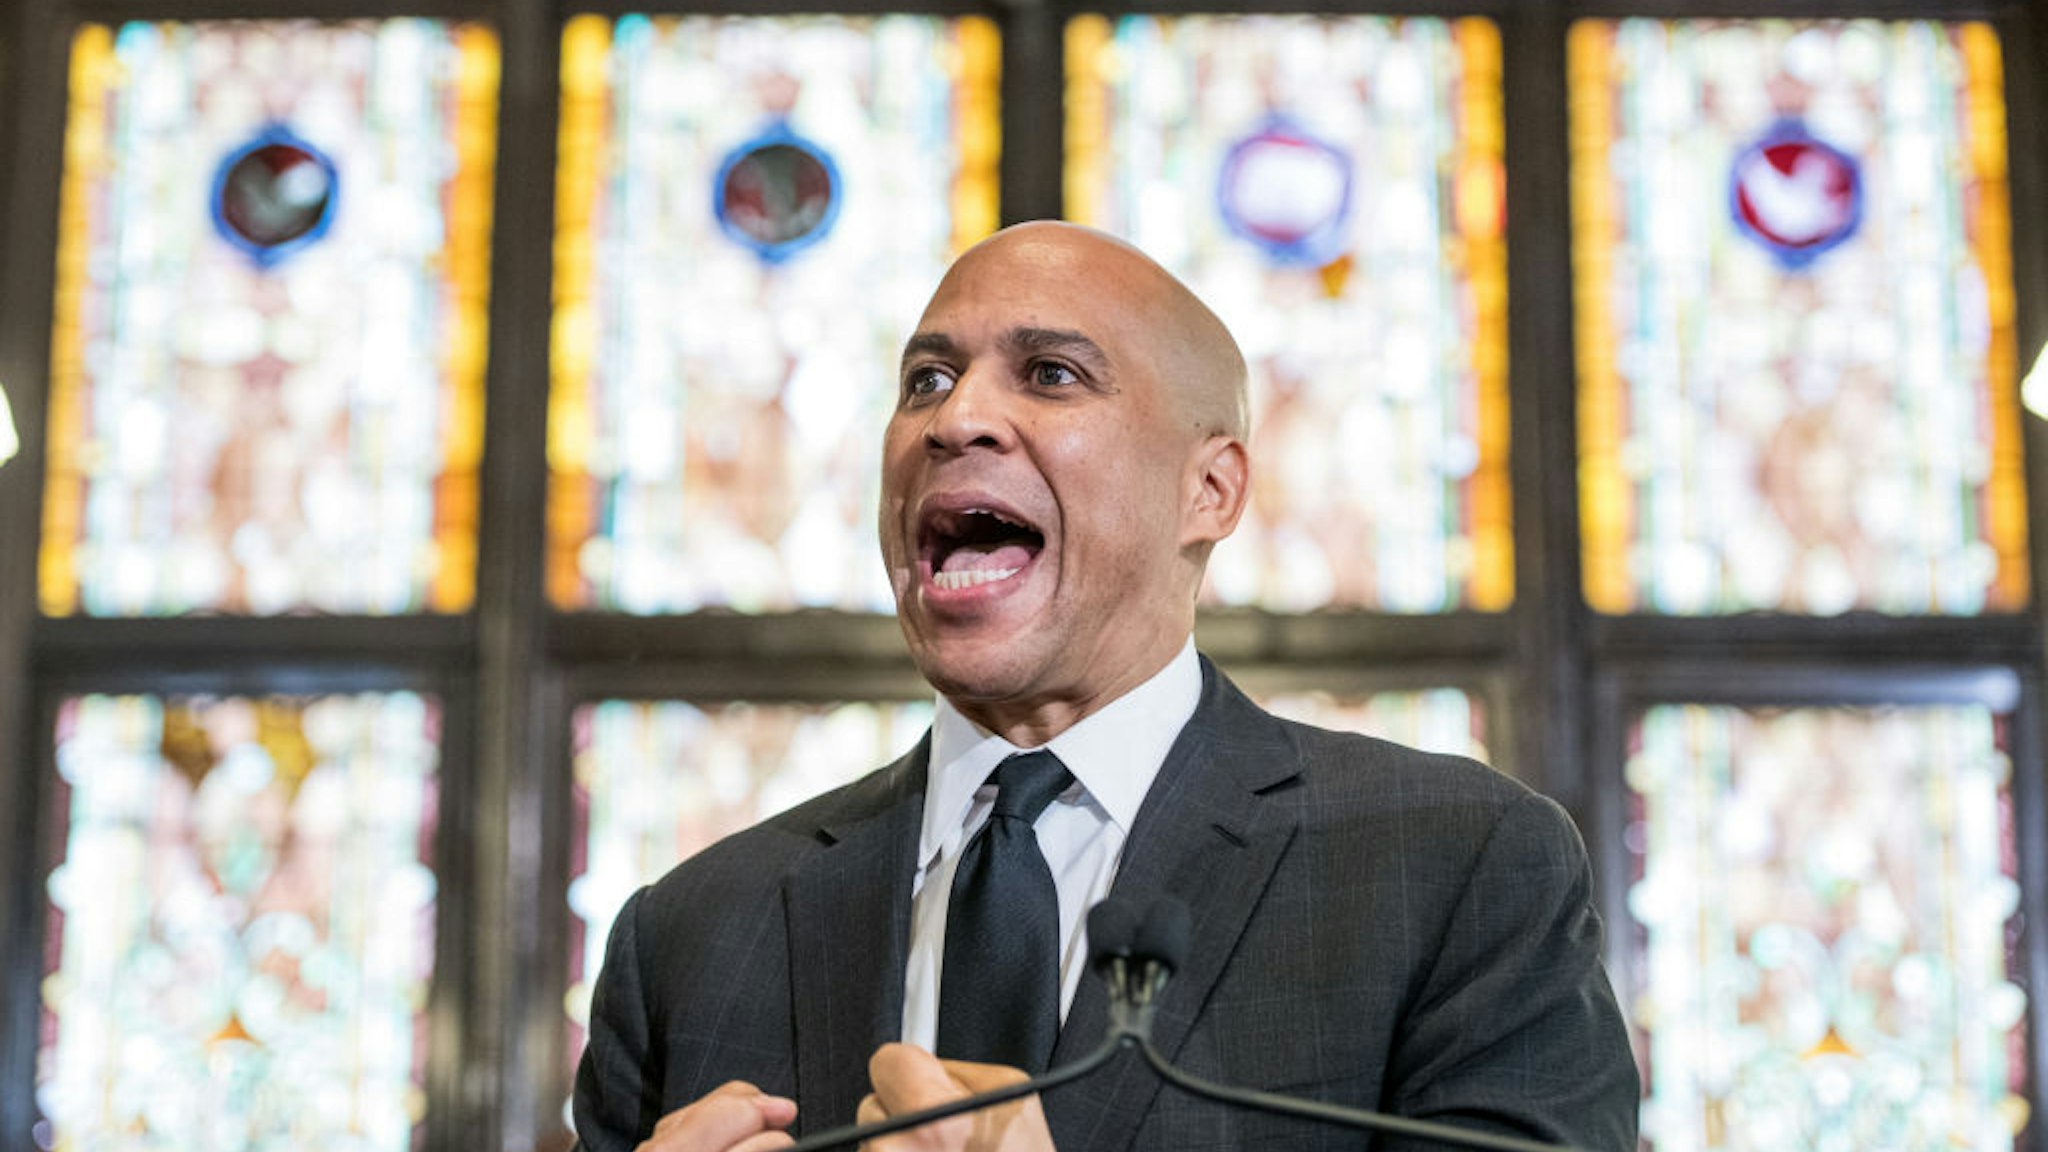 CHARLESTON, SC - AUGUST 7: Democratic presidential candidate and U.S. Sen. Cory Booker (D-NJ) speaks to a crowd about gun violence and white nationalism at Emanuel AME Church August 7, 2019 in Charleston, South Carolina. Booker's event, at the site where nine black parishioners were murdered in 2015 by a white supremacist, comes in response to last week's racially motivated mass shooting in El Paso, Texas